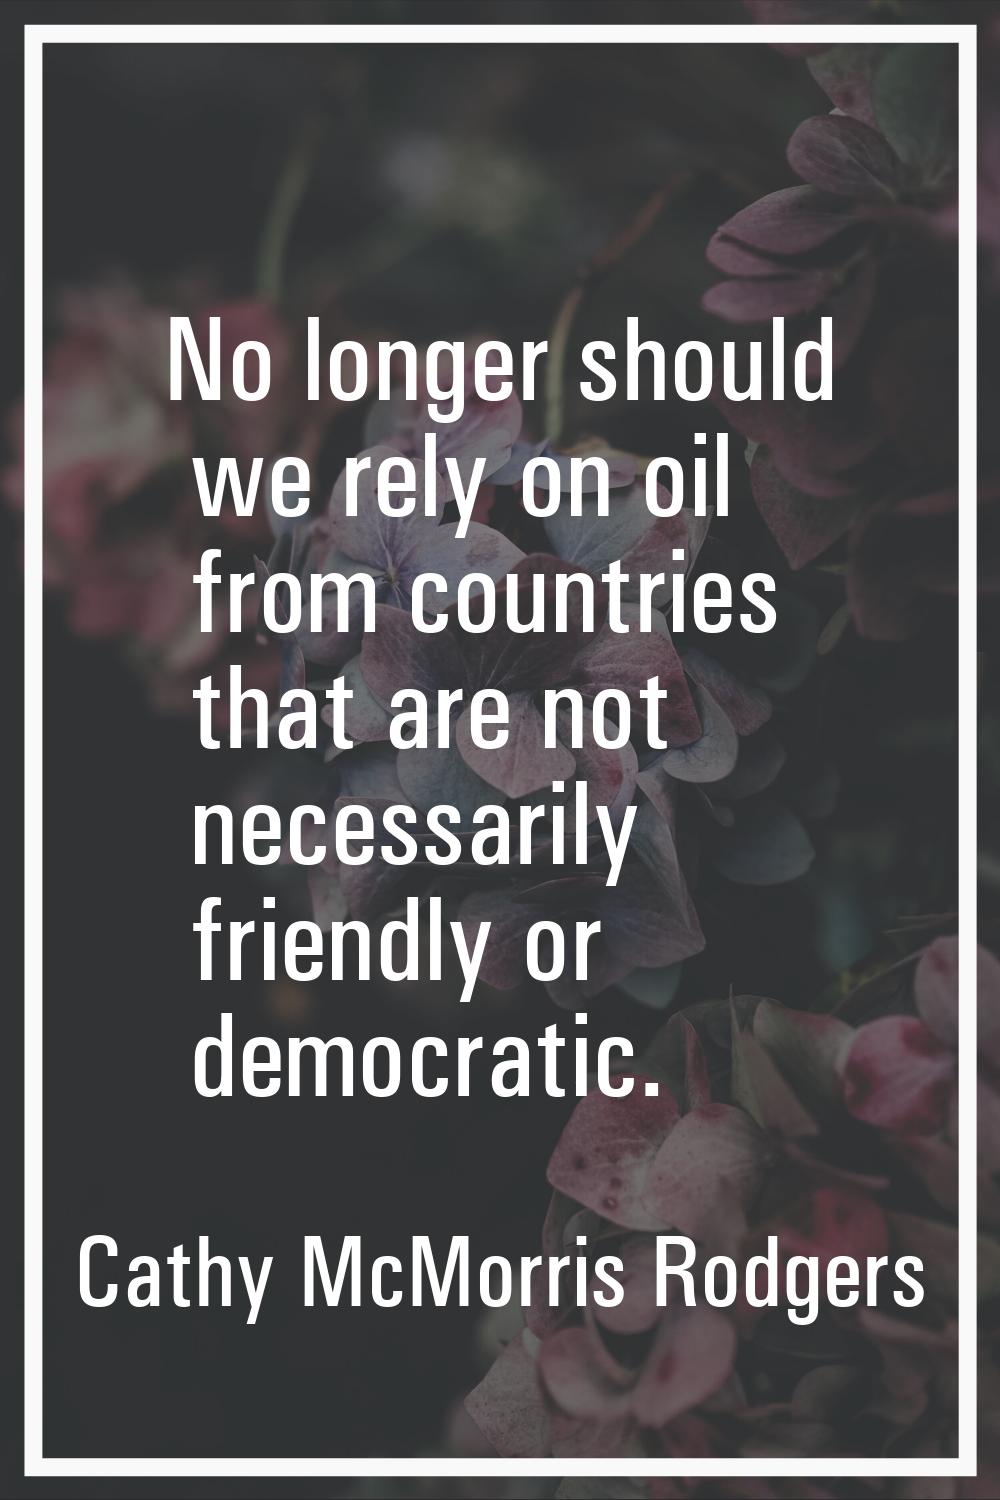 No longer should we rely on oil from countries that are not necessarily friendly or democratic.